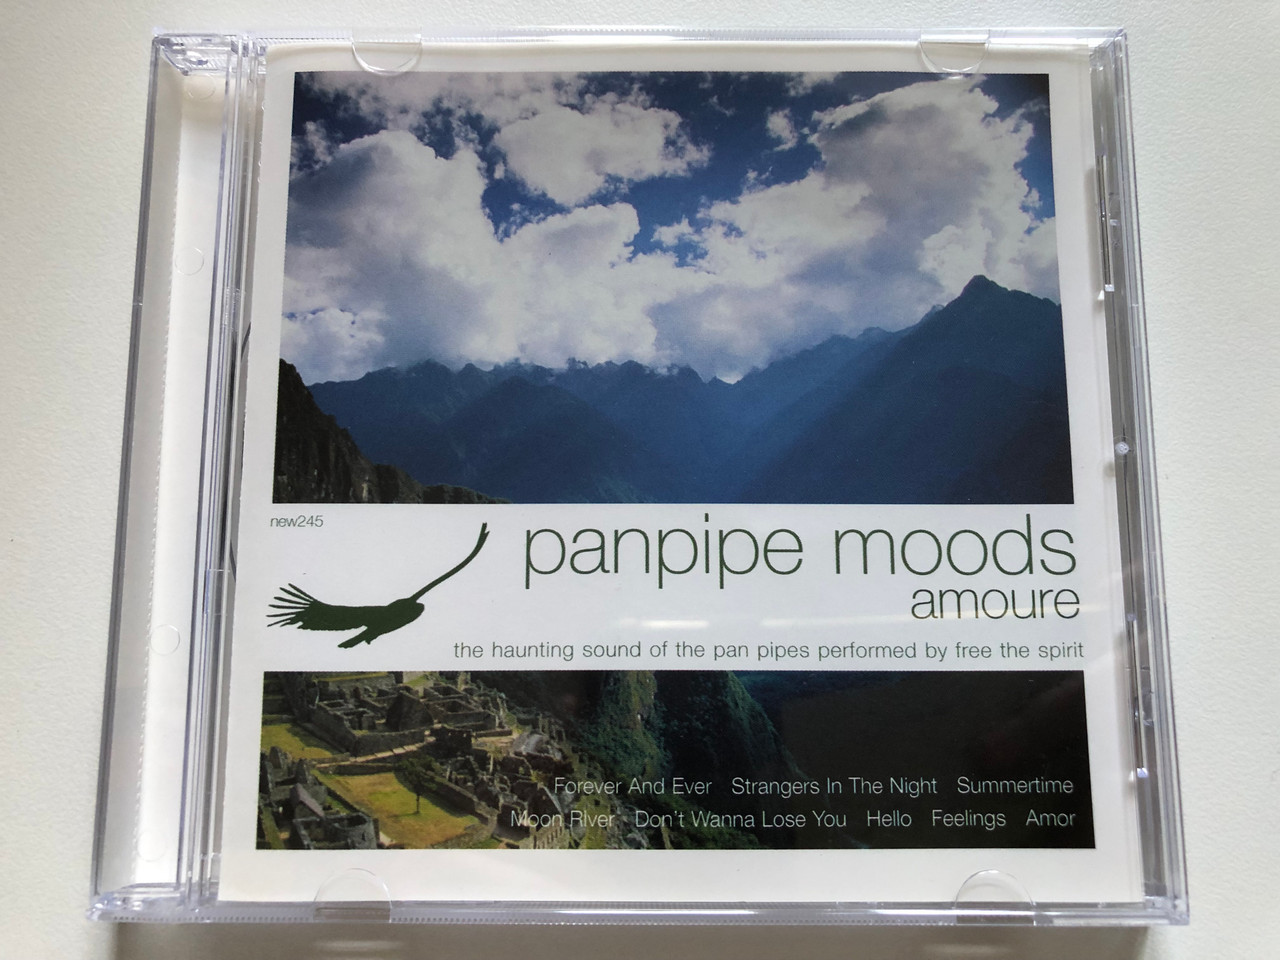 https://cdn10.bigcommerce.com/s-62bdpkt7pb/products/0/images/236040/Panpipe_Moods_-_Amoure_The_haunting_sound_of_the_pan_pipes_performed_by_free_the_spirit_Forever_And_Ever_Strangers_In_The_Night_Summertime_Moon_River_Dont_Wanna_Lose_You_Hello_Fellin_1__48785.1656409641.1280.1280.JPG?c=2&_gl=1*kshlwq*_ga*MjA2NTIxMjE2MC4xNTkwNTEyNTMy*_ga_WS2VZYPC6G*MTY1NjQwODYyMi40NTcuMS4xNjU2NDA5MzM0LjEw